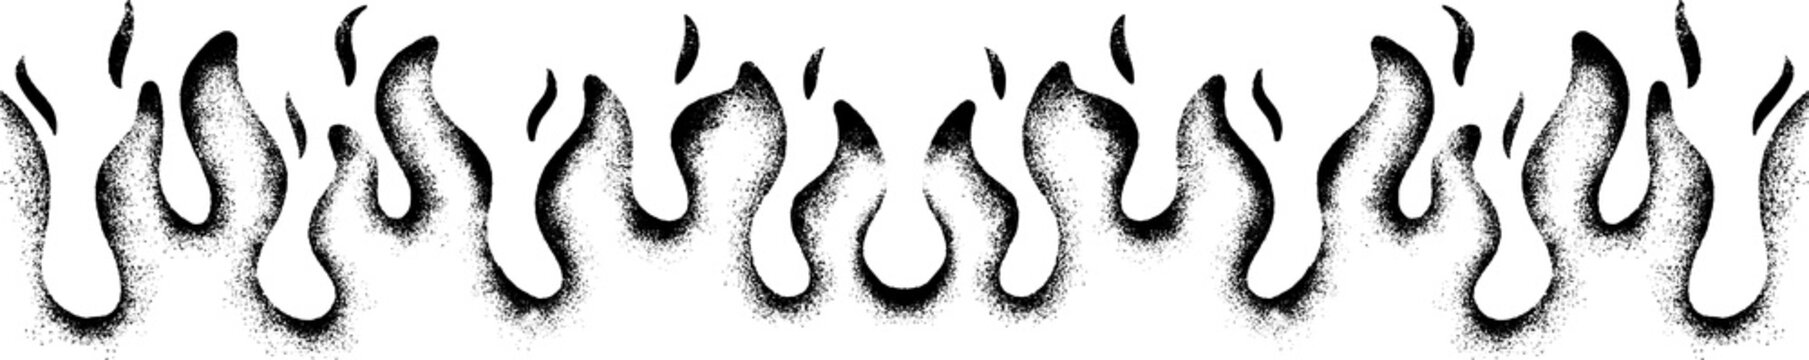 Spray Painted Graffiti Fire flame icon Sprayed isolated with a white background.